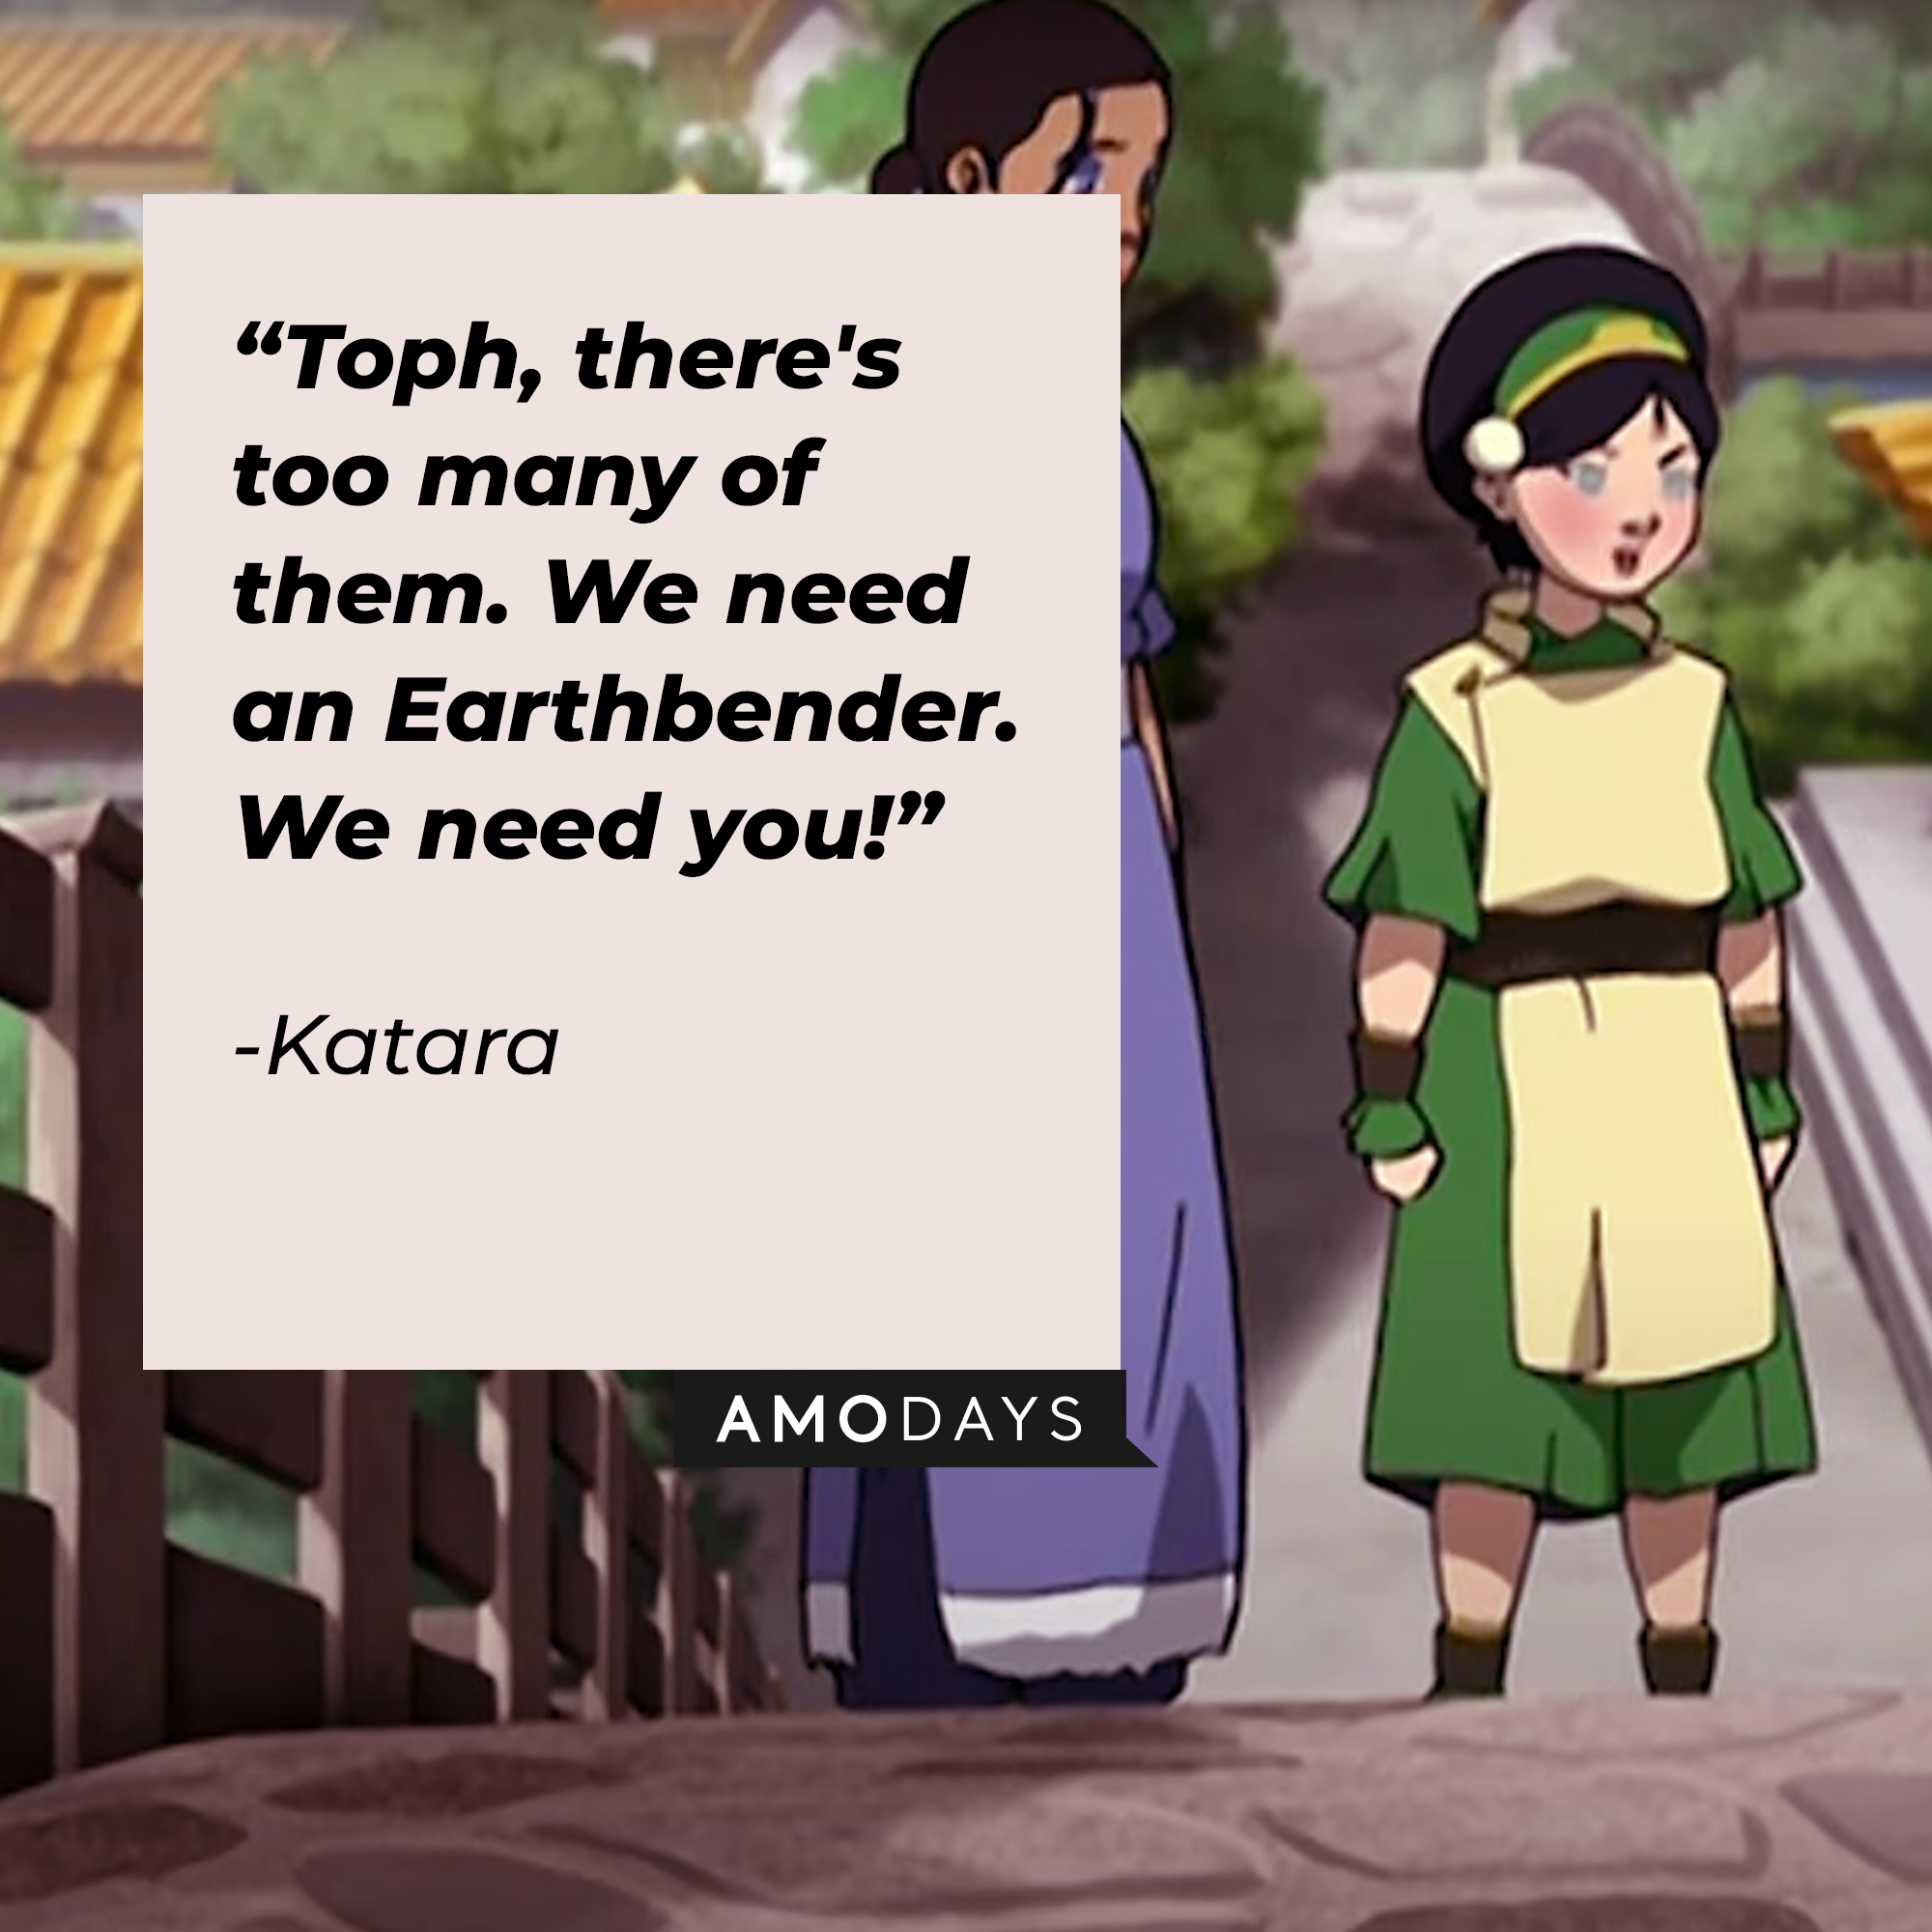 Katara's quote: “Toph, there's too many of them. We need an Earthbender. We need you!” | Source: youtube.com/TeamAvatar